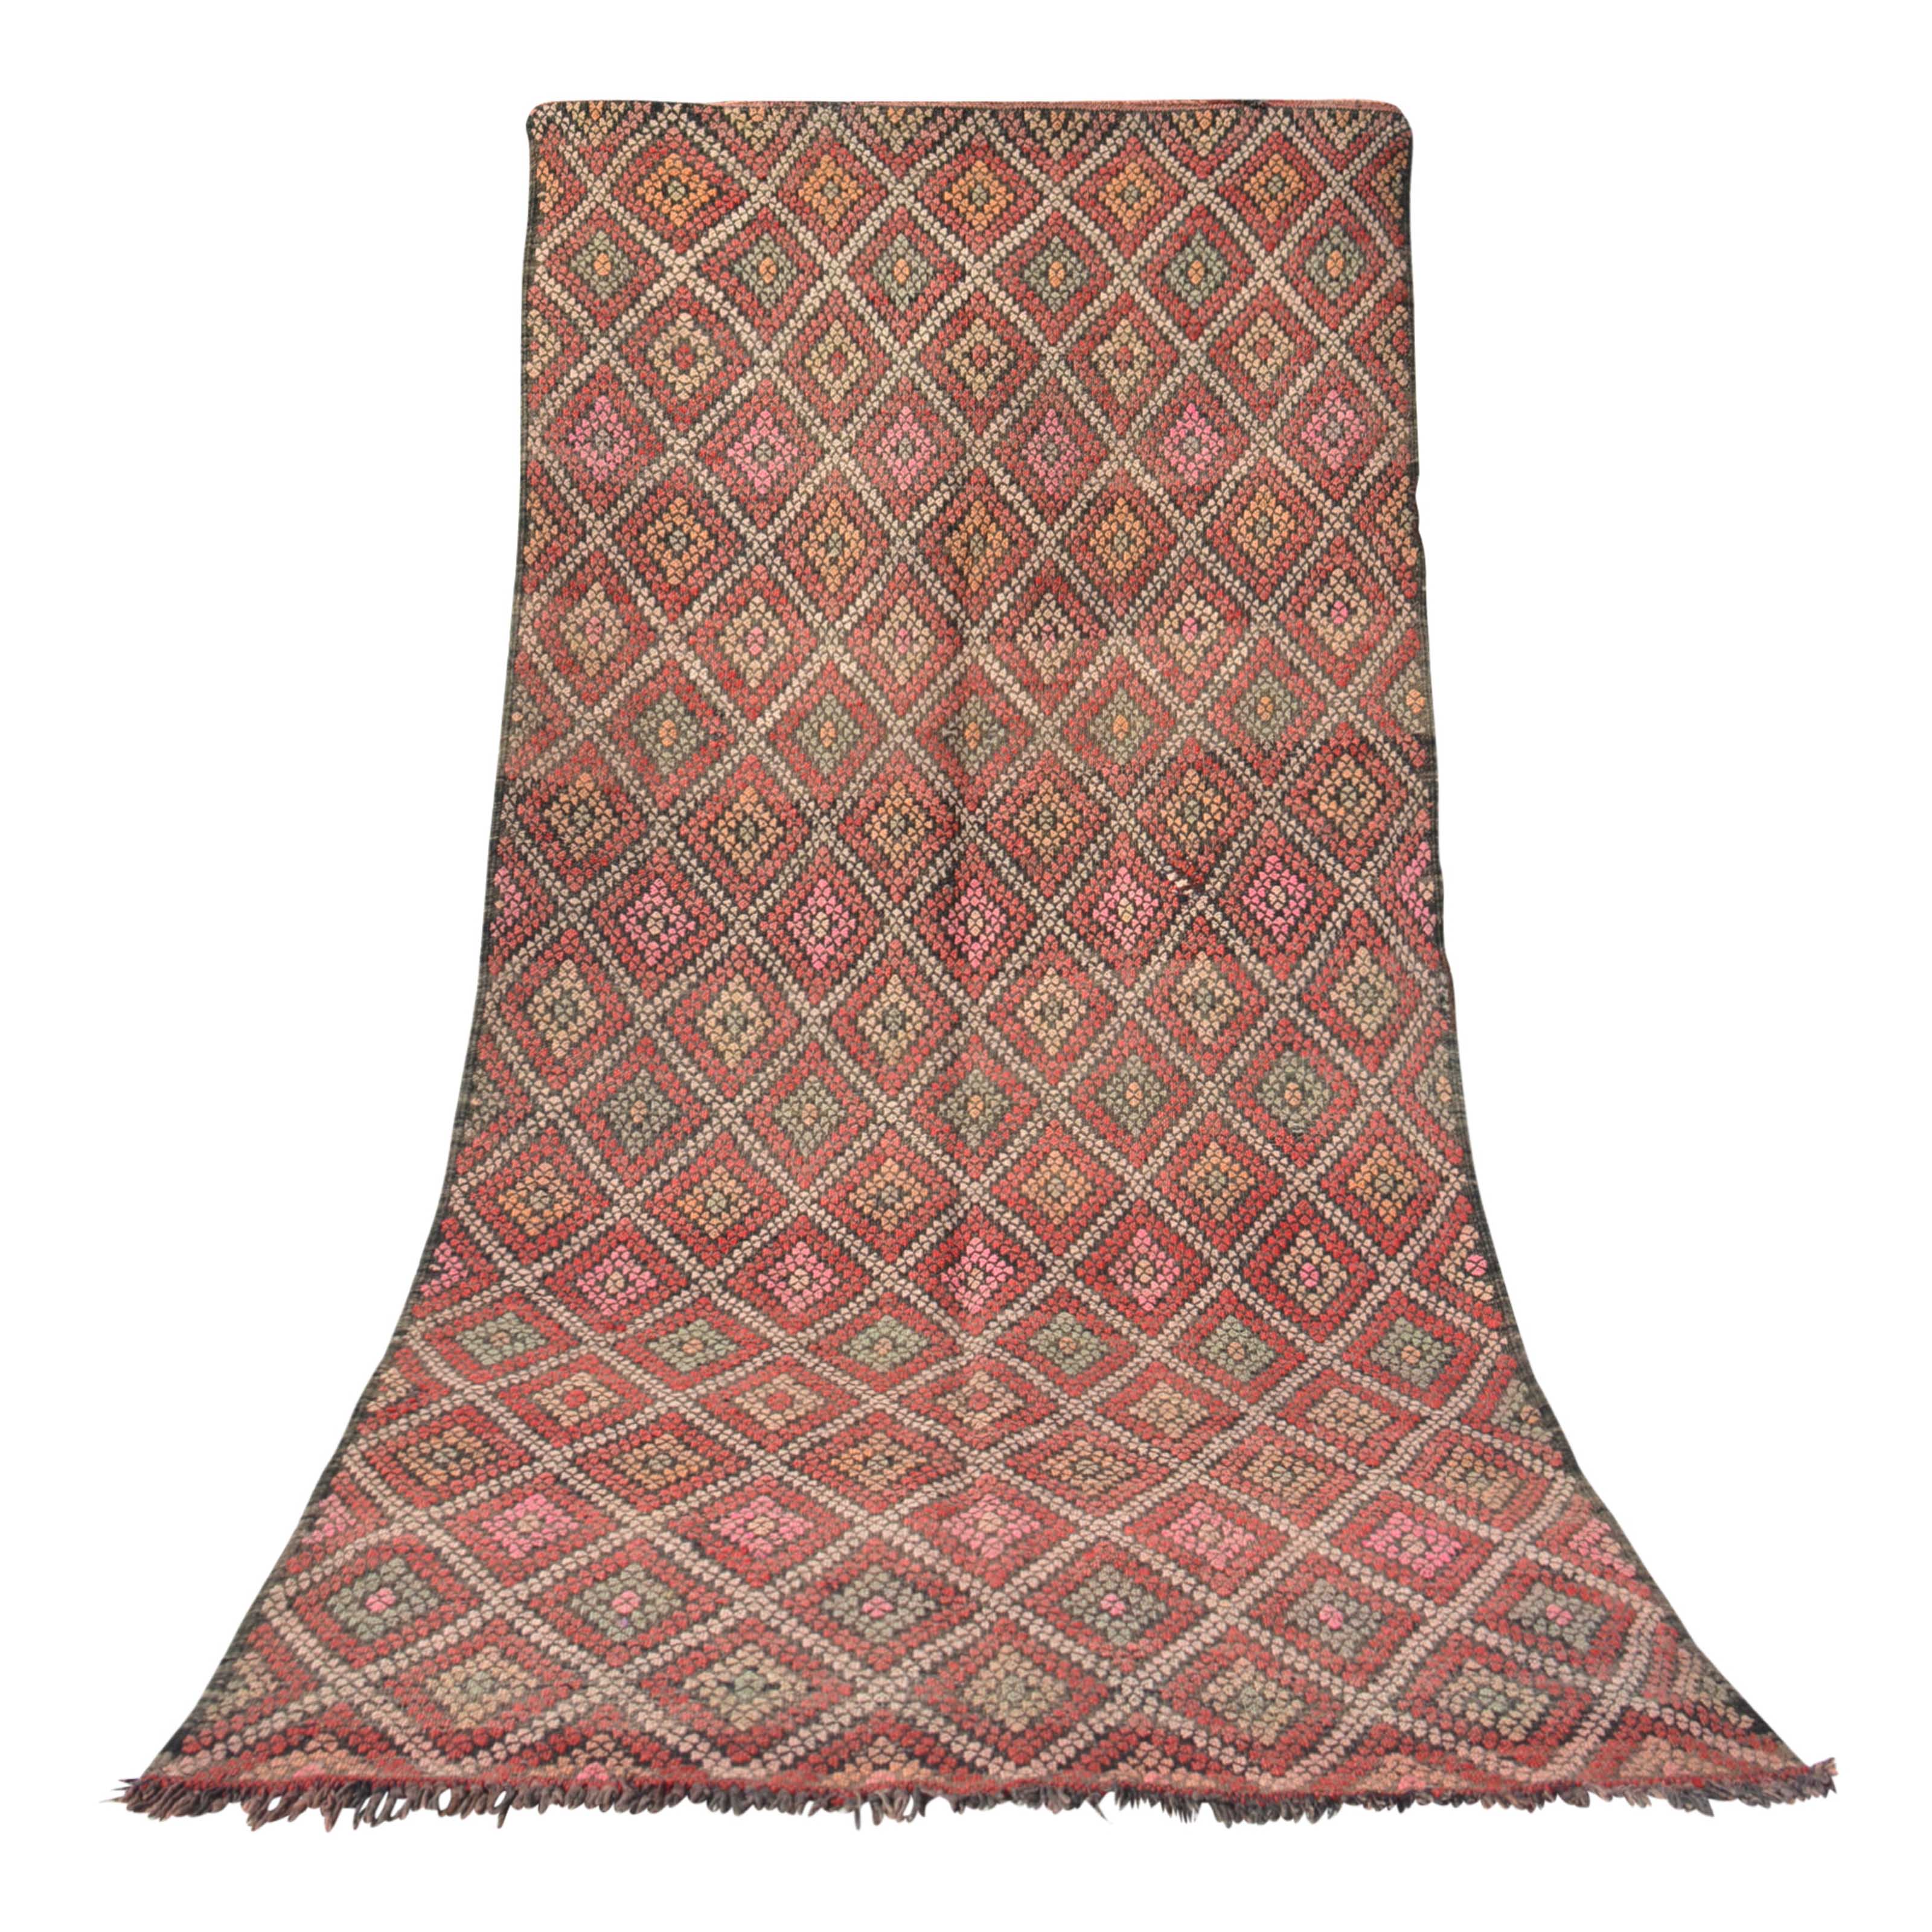 Rugs For Sale Online with Free UK Delivery at The Rug Seller